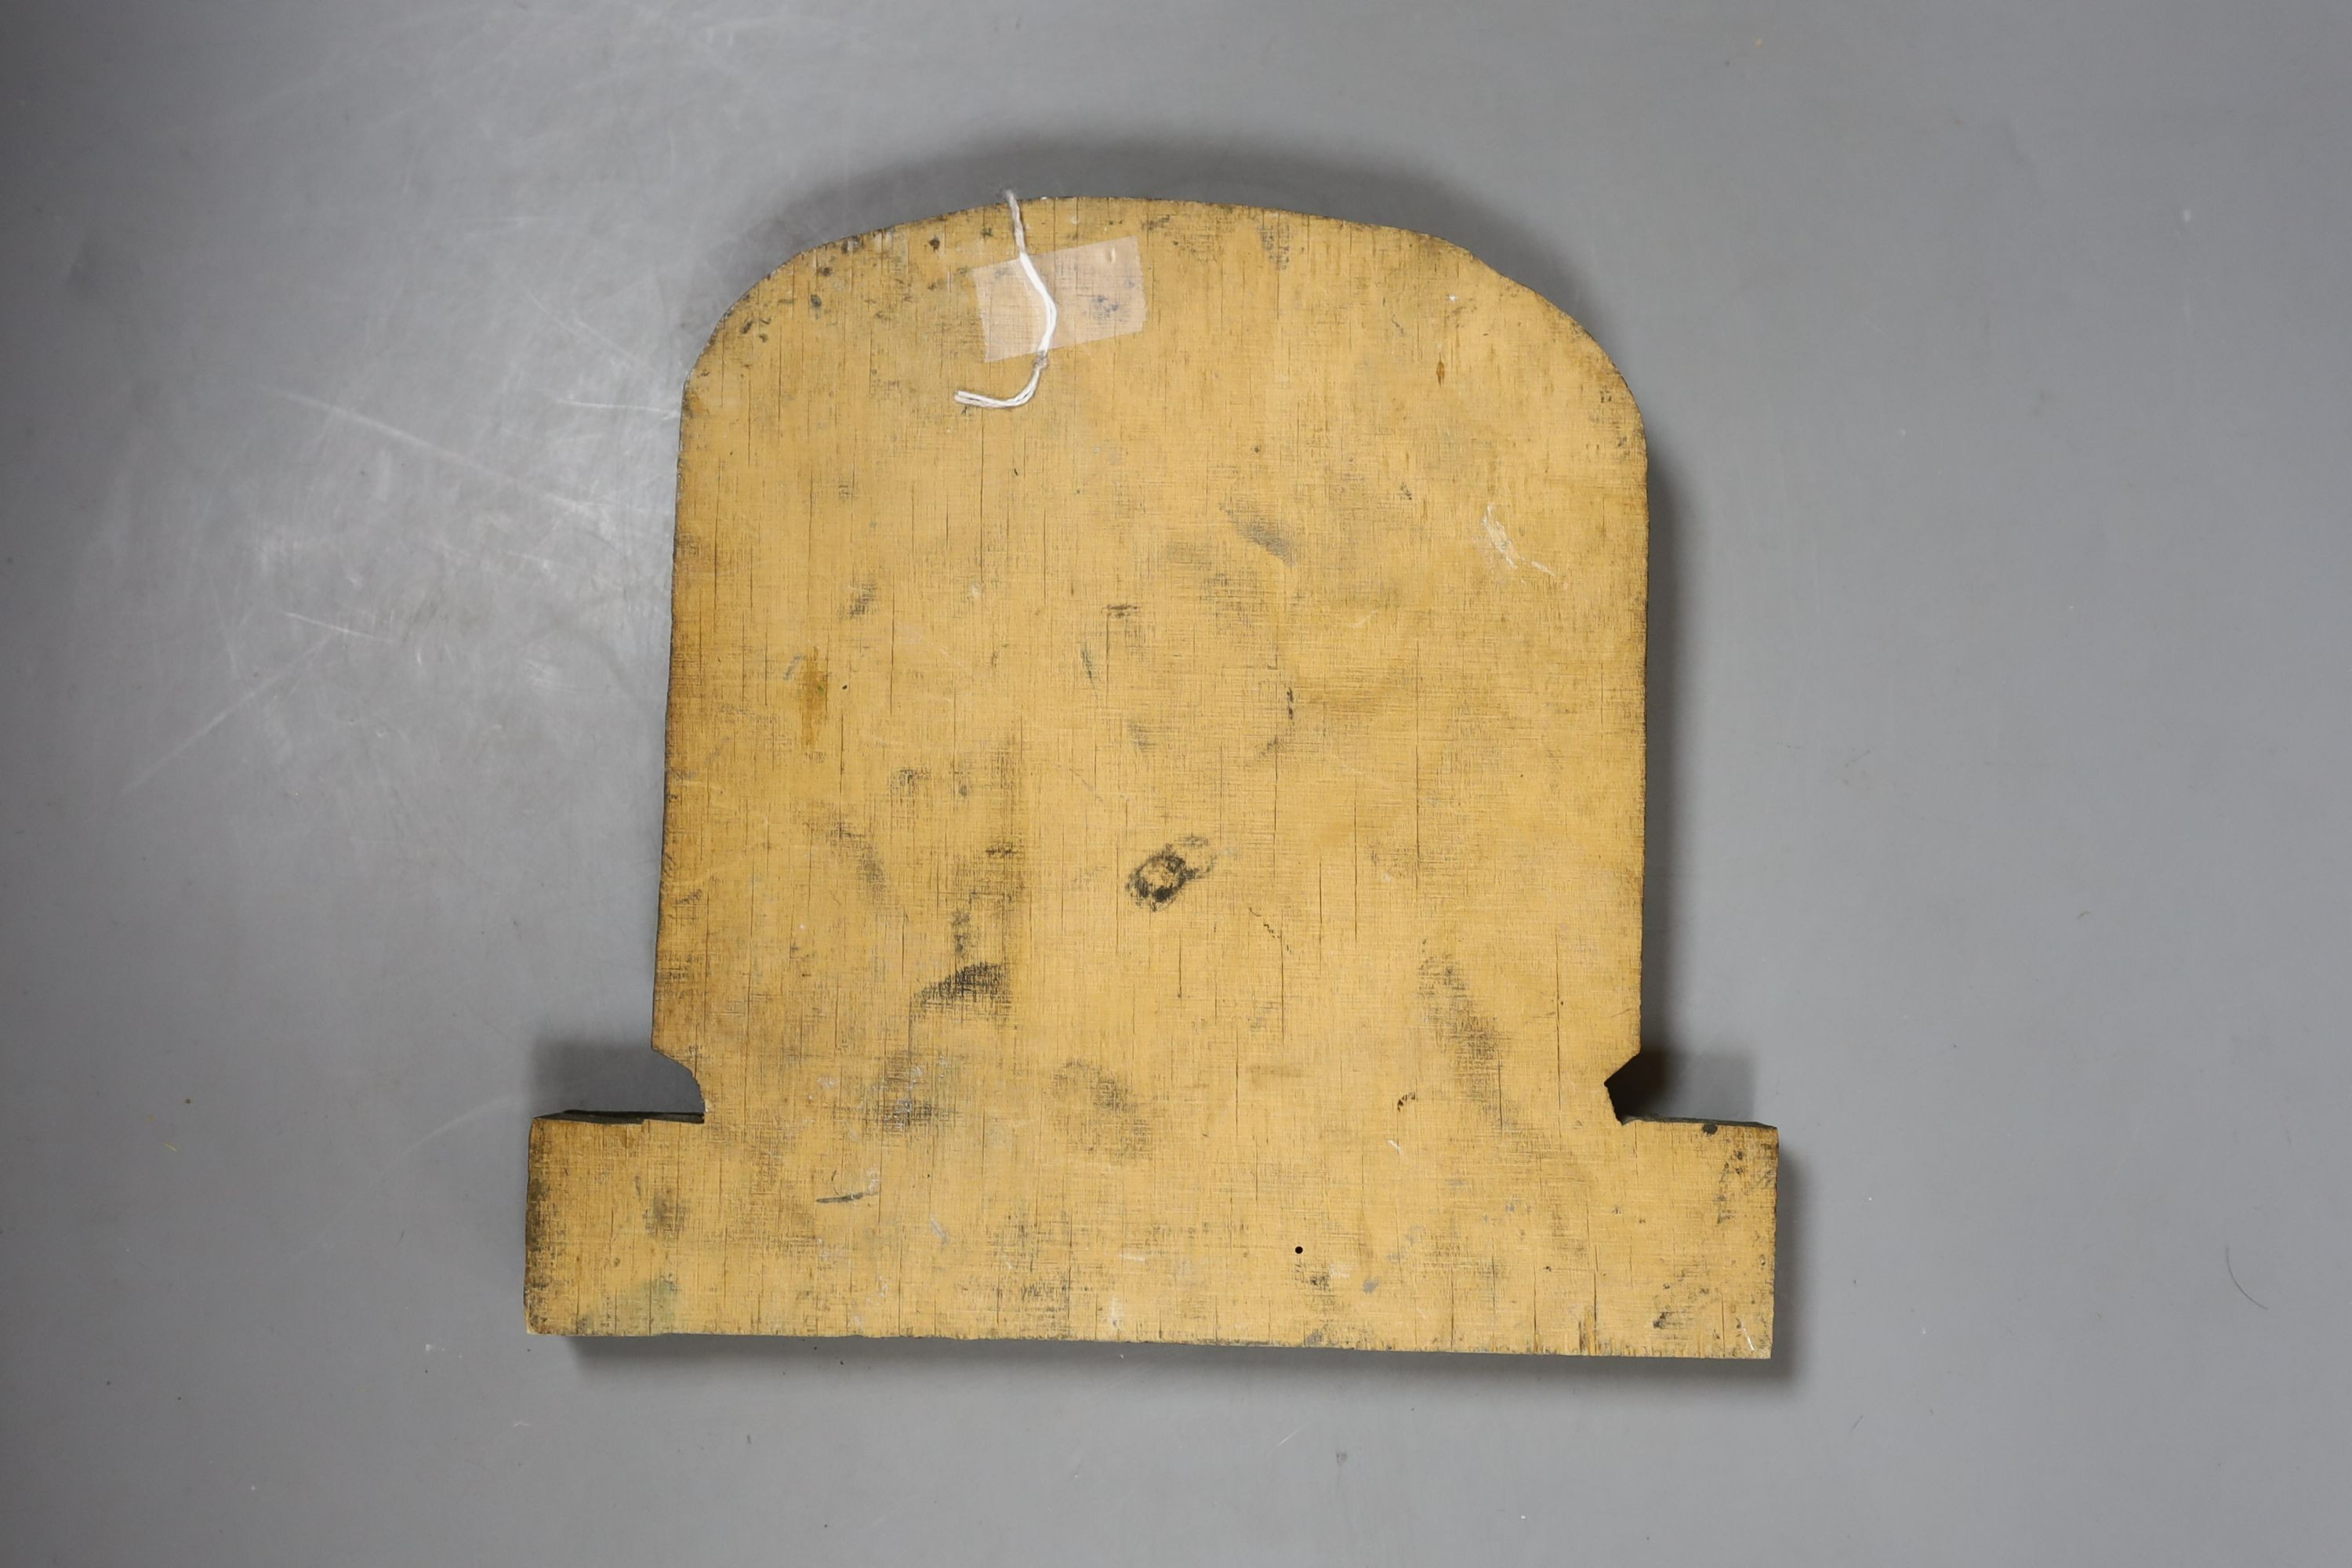 A 19th century copper fire mark, later painted, mounted on cut wood. 23cm long